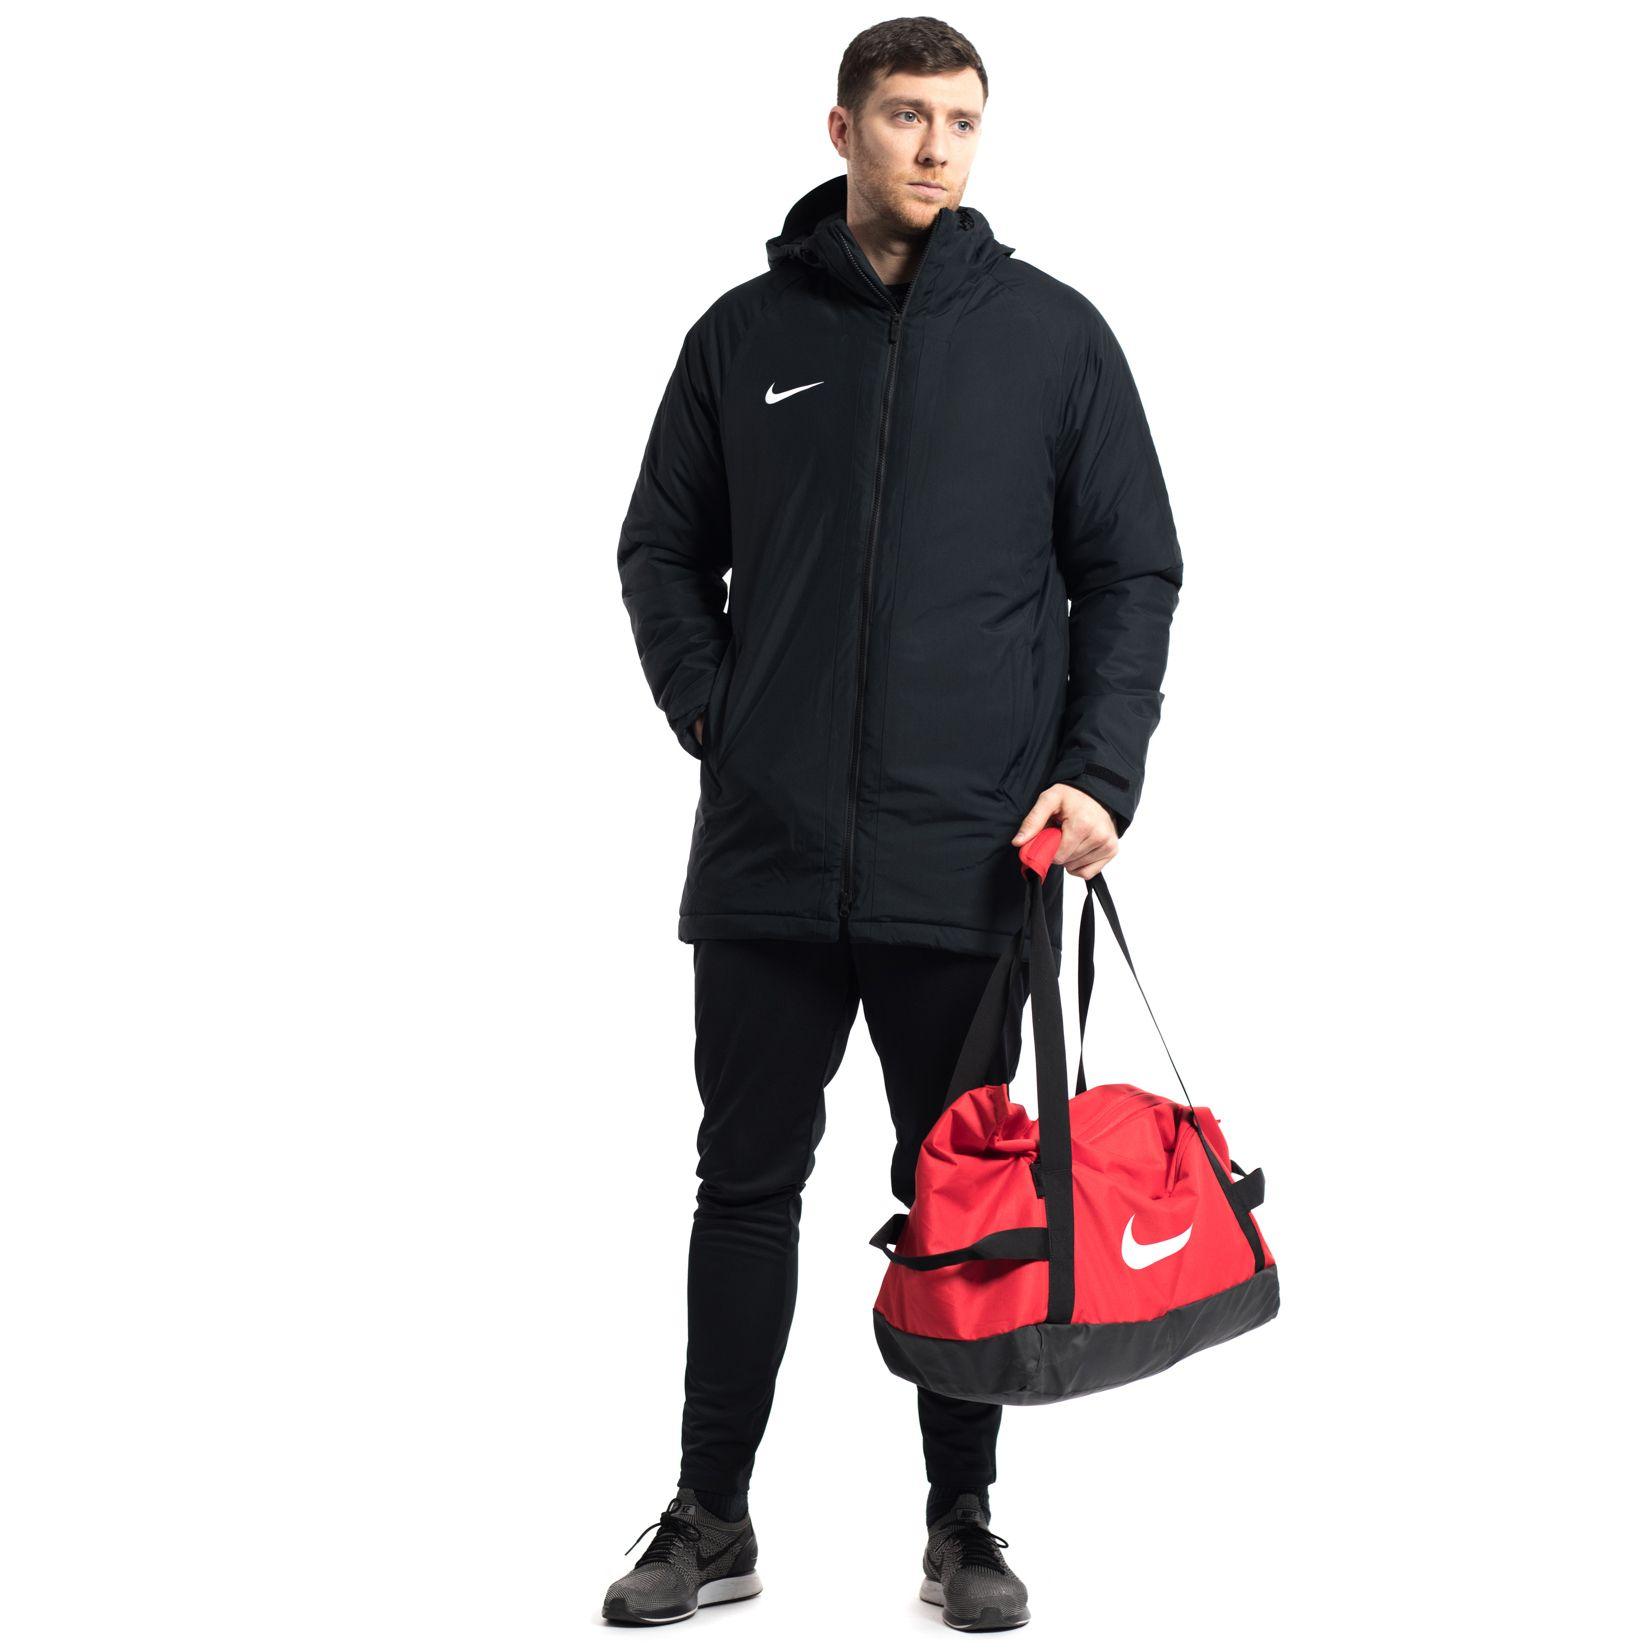 Nike Dry Academy 18 Winter Jacket Hotsell, 51% OFF | universousb.com